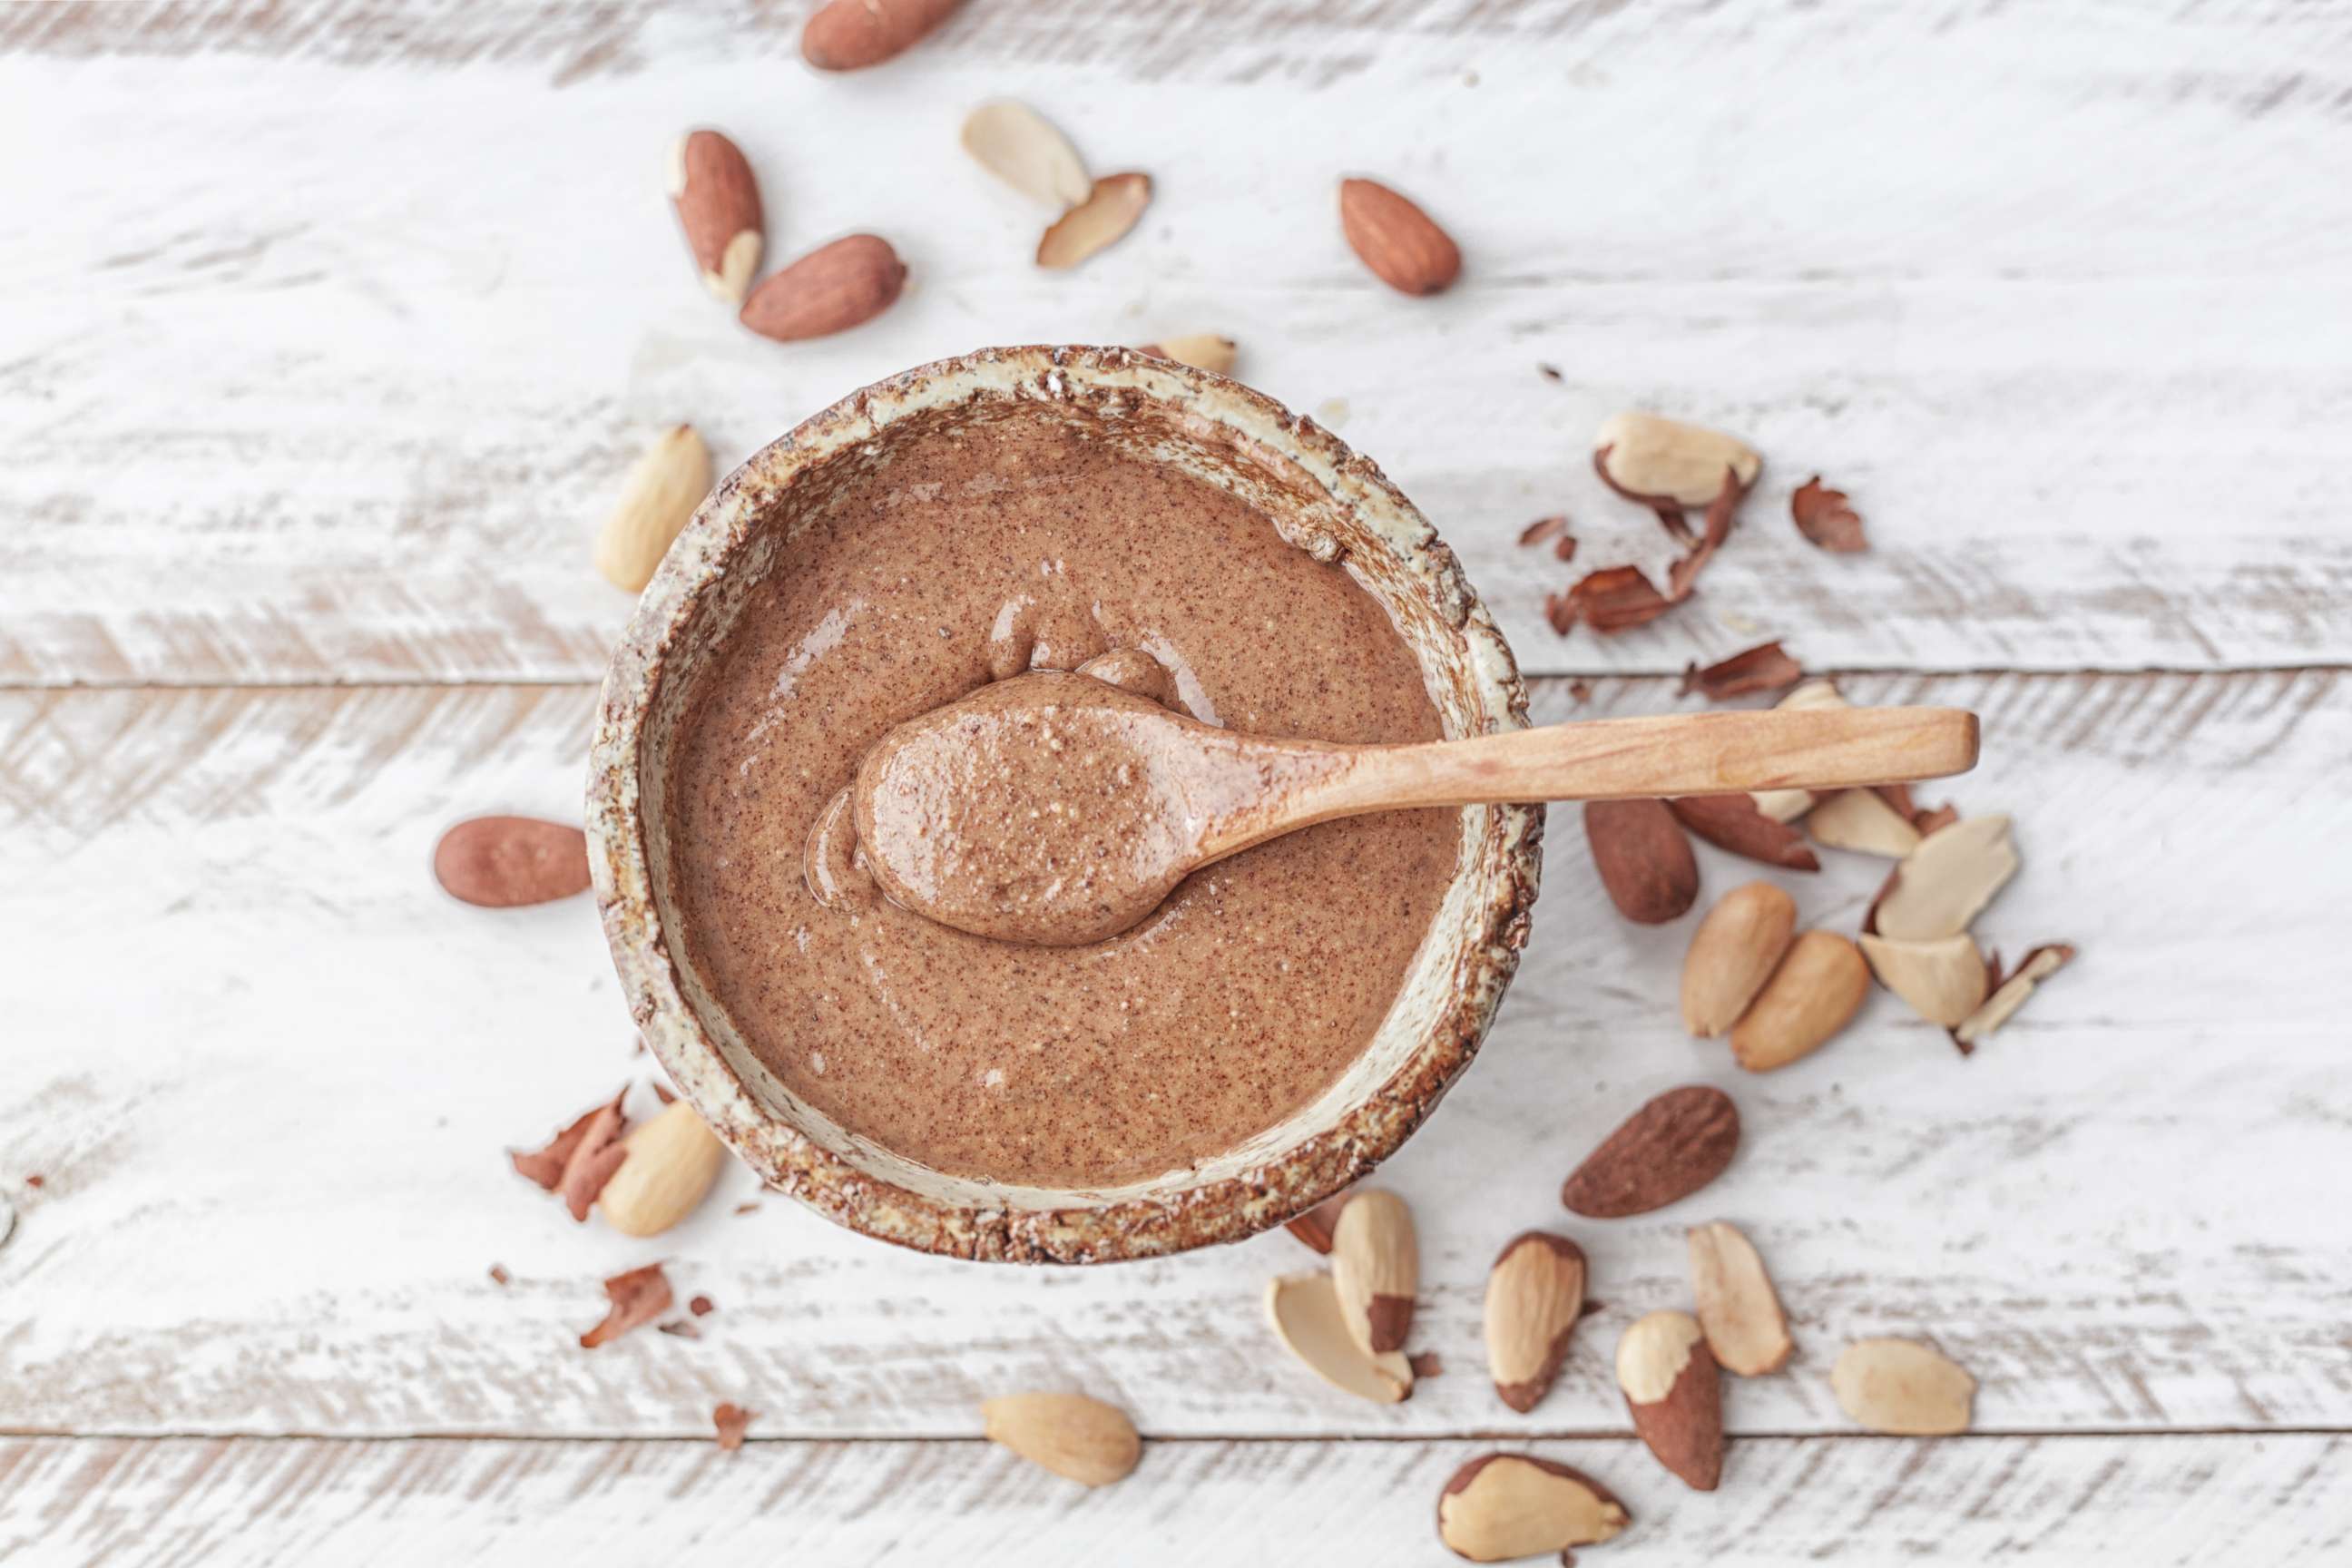 PHOTO: Almond butter is pictured in this undated stock photo.